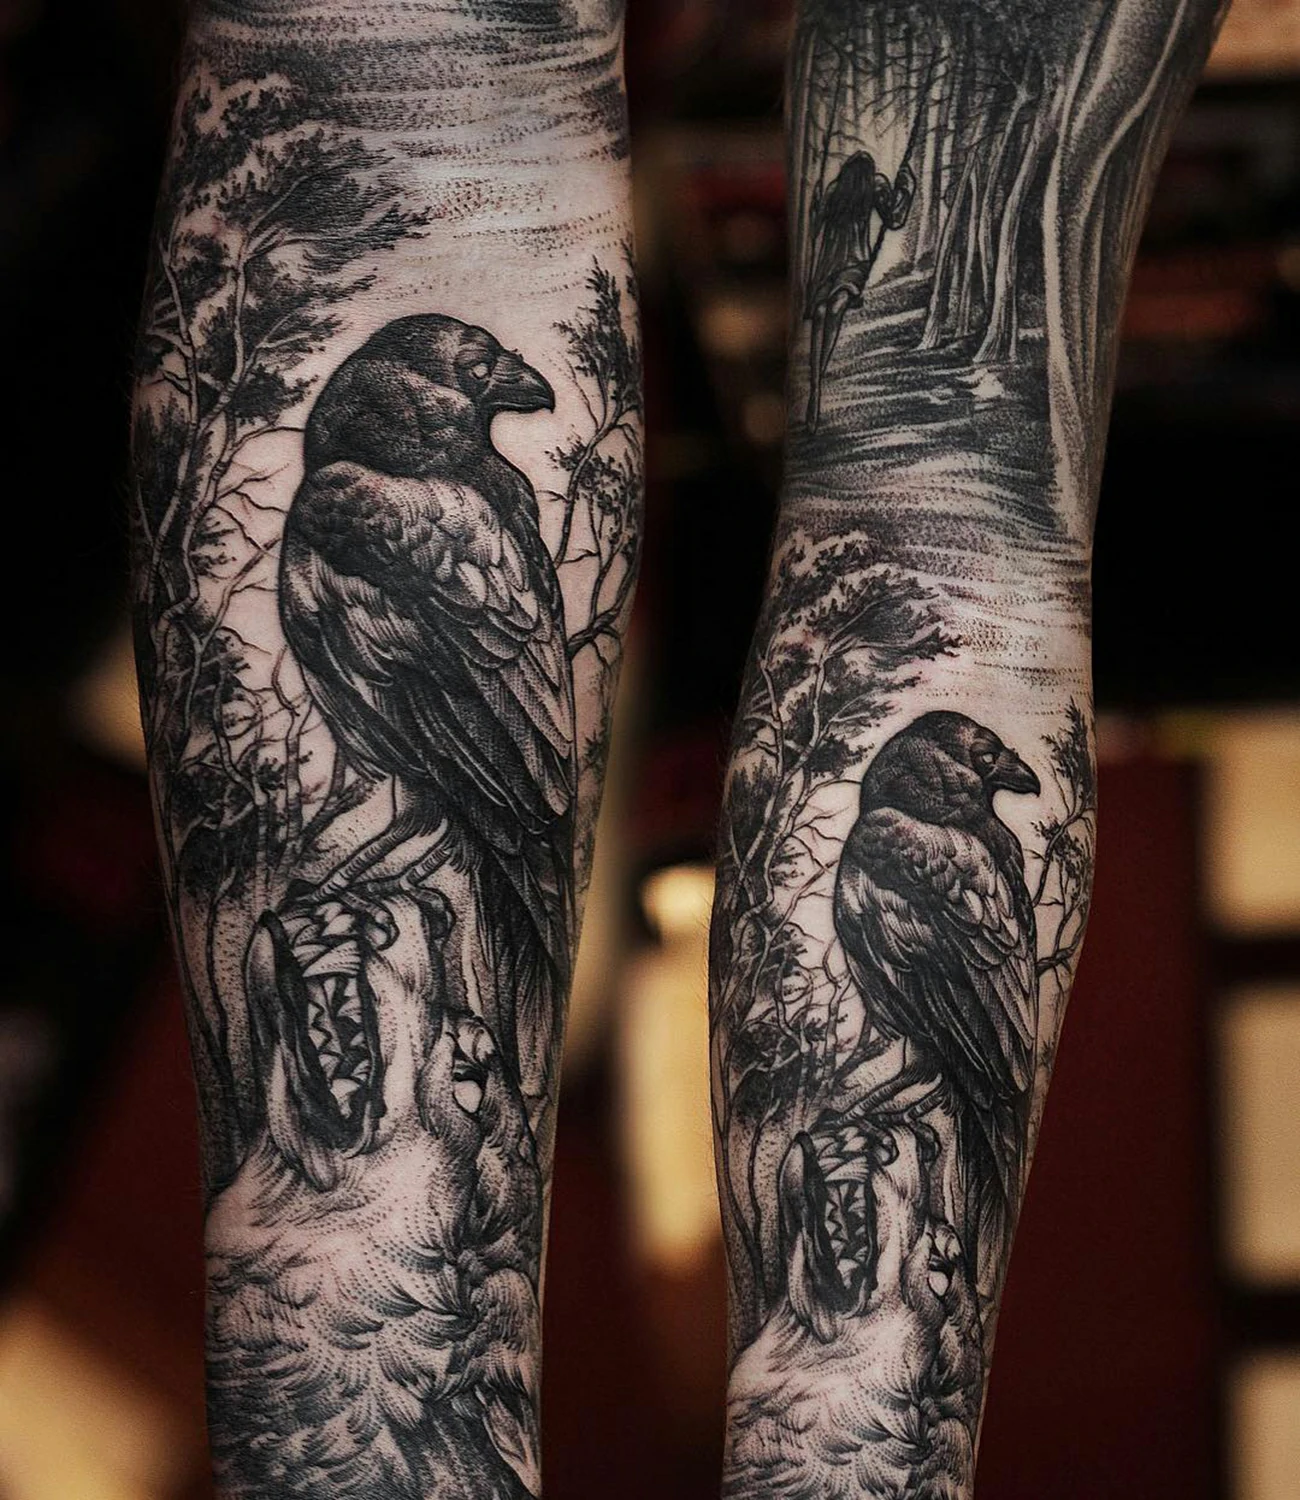 Raven tattoo sleeve: An extensive tattoo design covering the arm, featuring ravens.